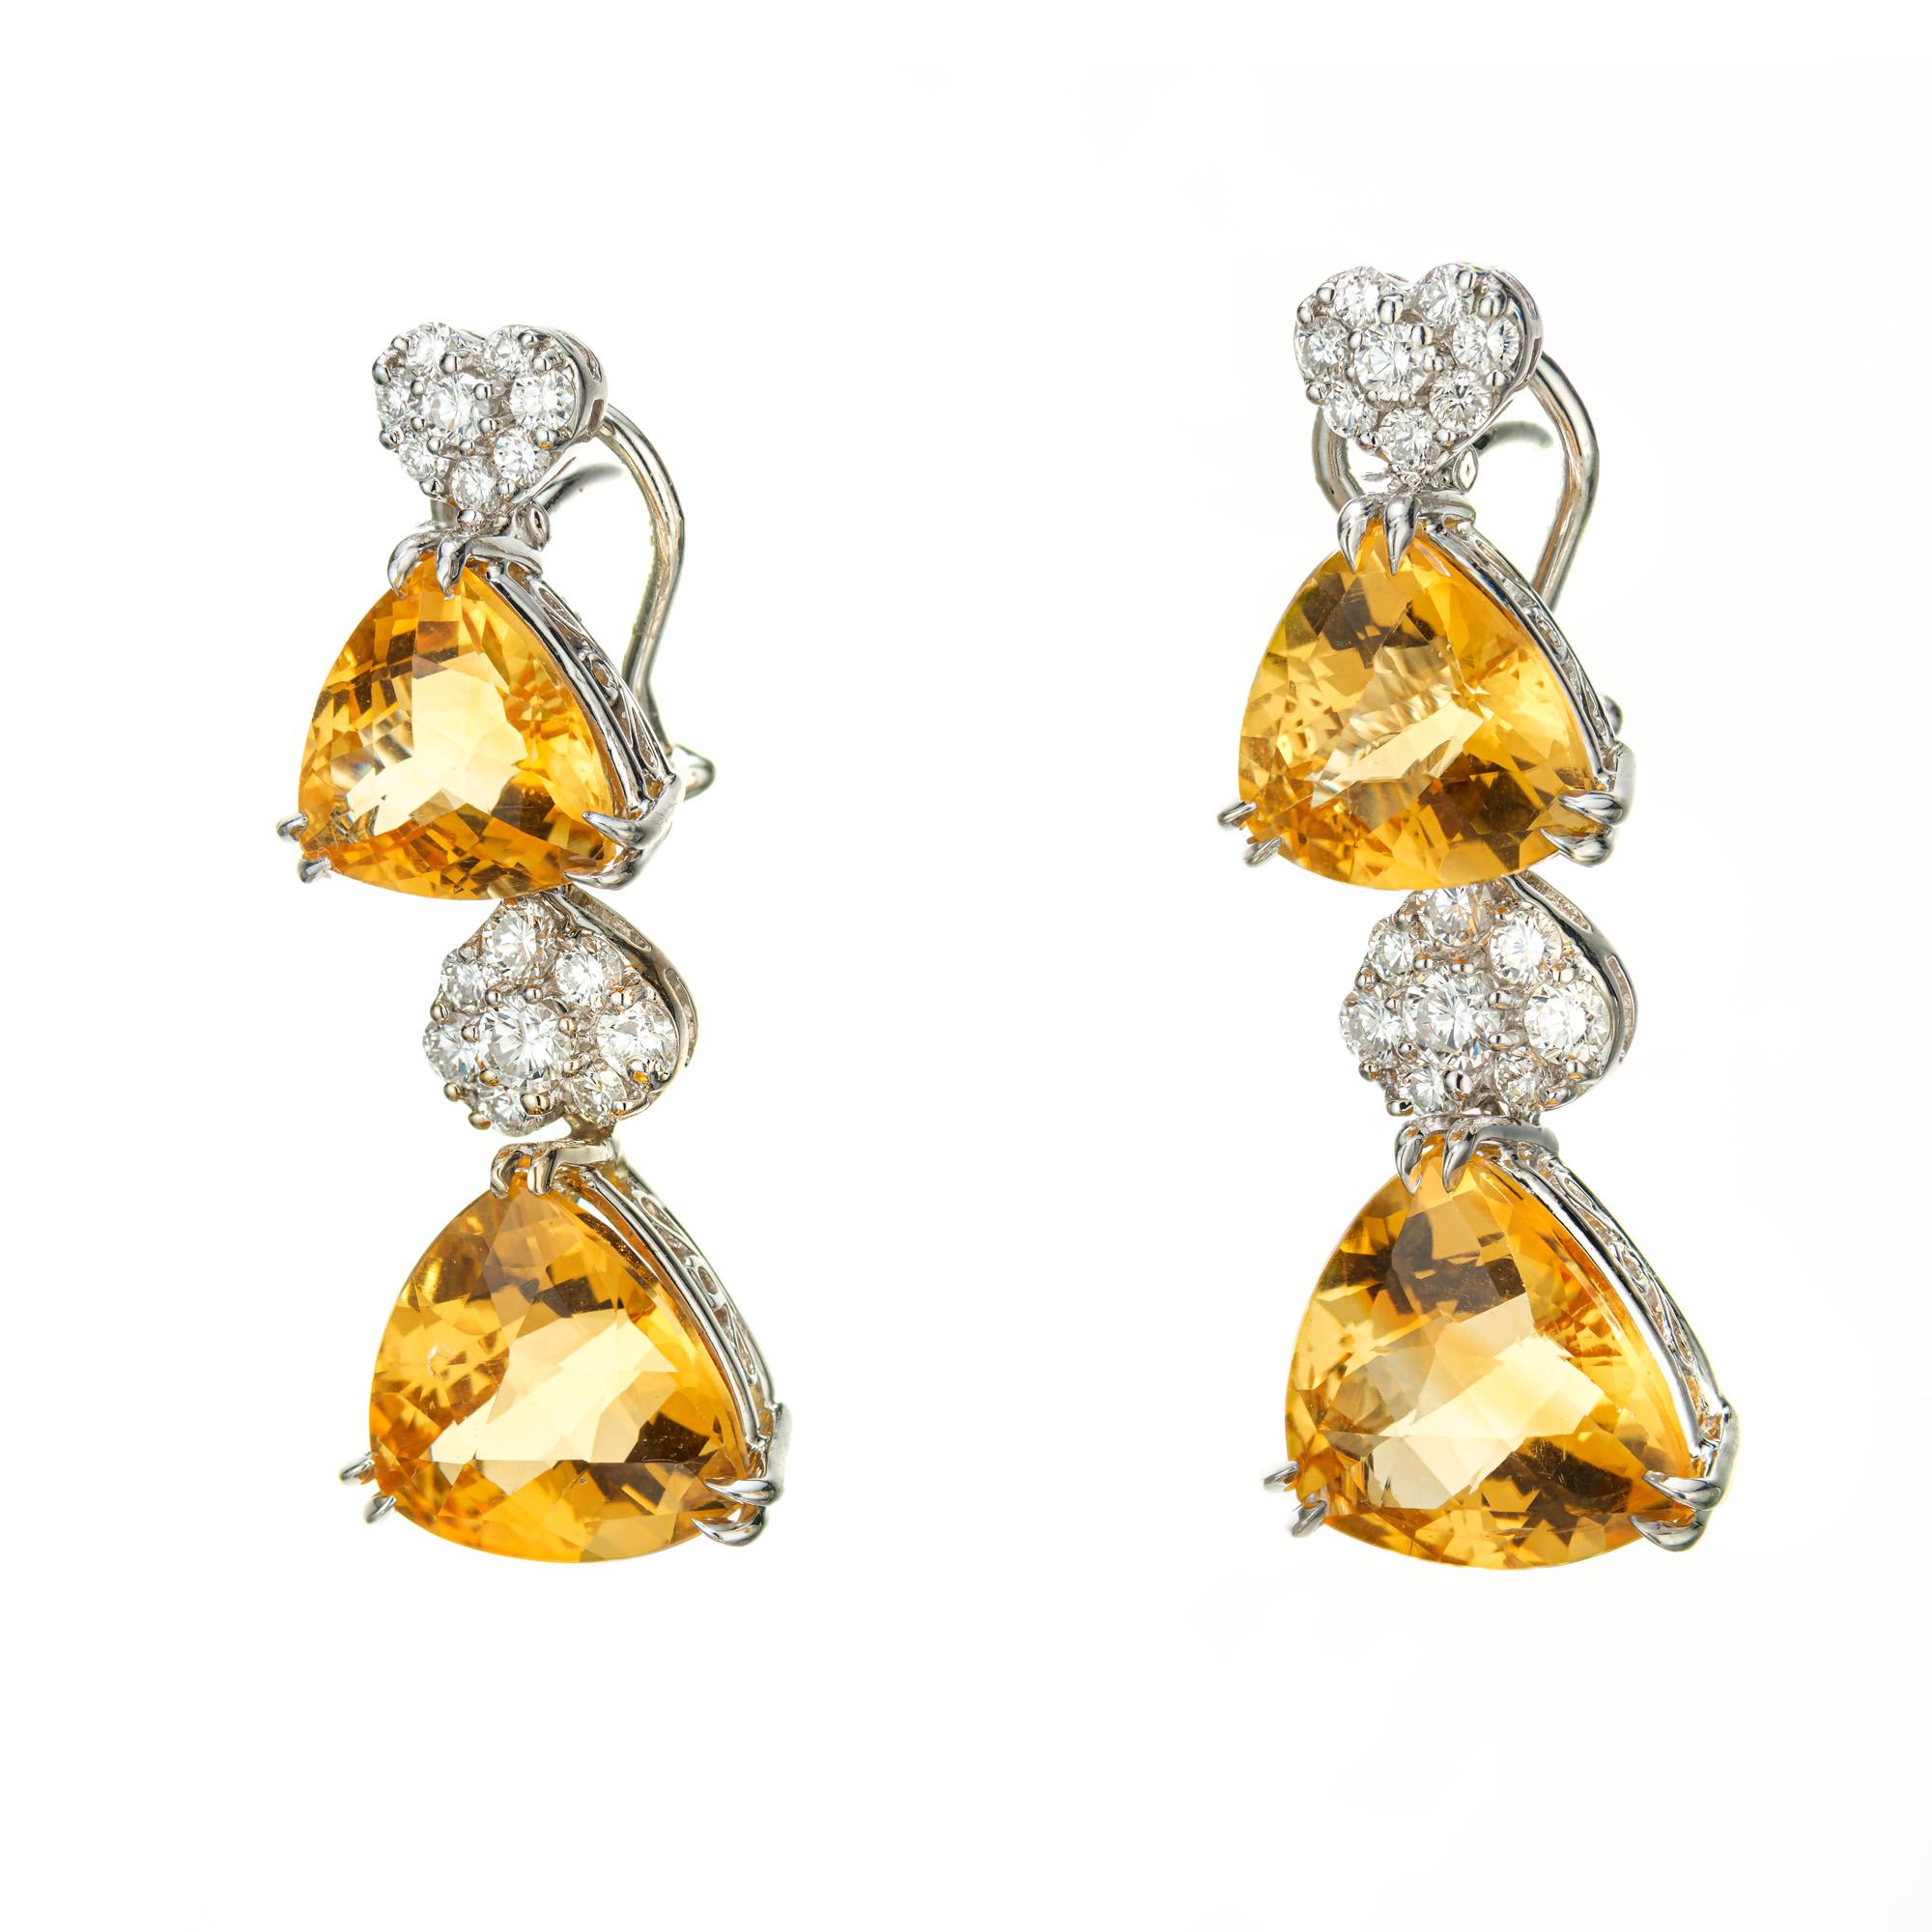 Citrine and diamond dangle clip post earrings. 4 fantasy cut triangular yellow citrines set in 18k white gold with 32 round brilliant cut accent diamonds. 

4 Triangular yellow citrines, approx. total weight. 18.00cts   11.3x7.3mm  and  14x8.5mm
32